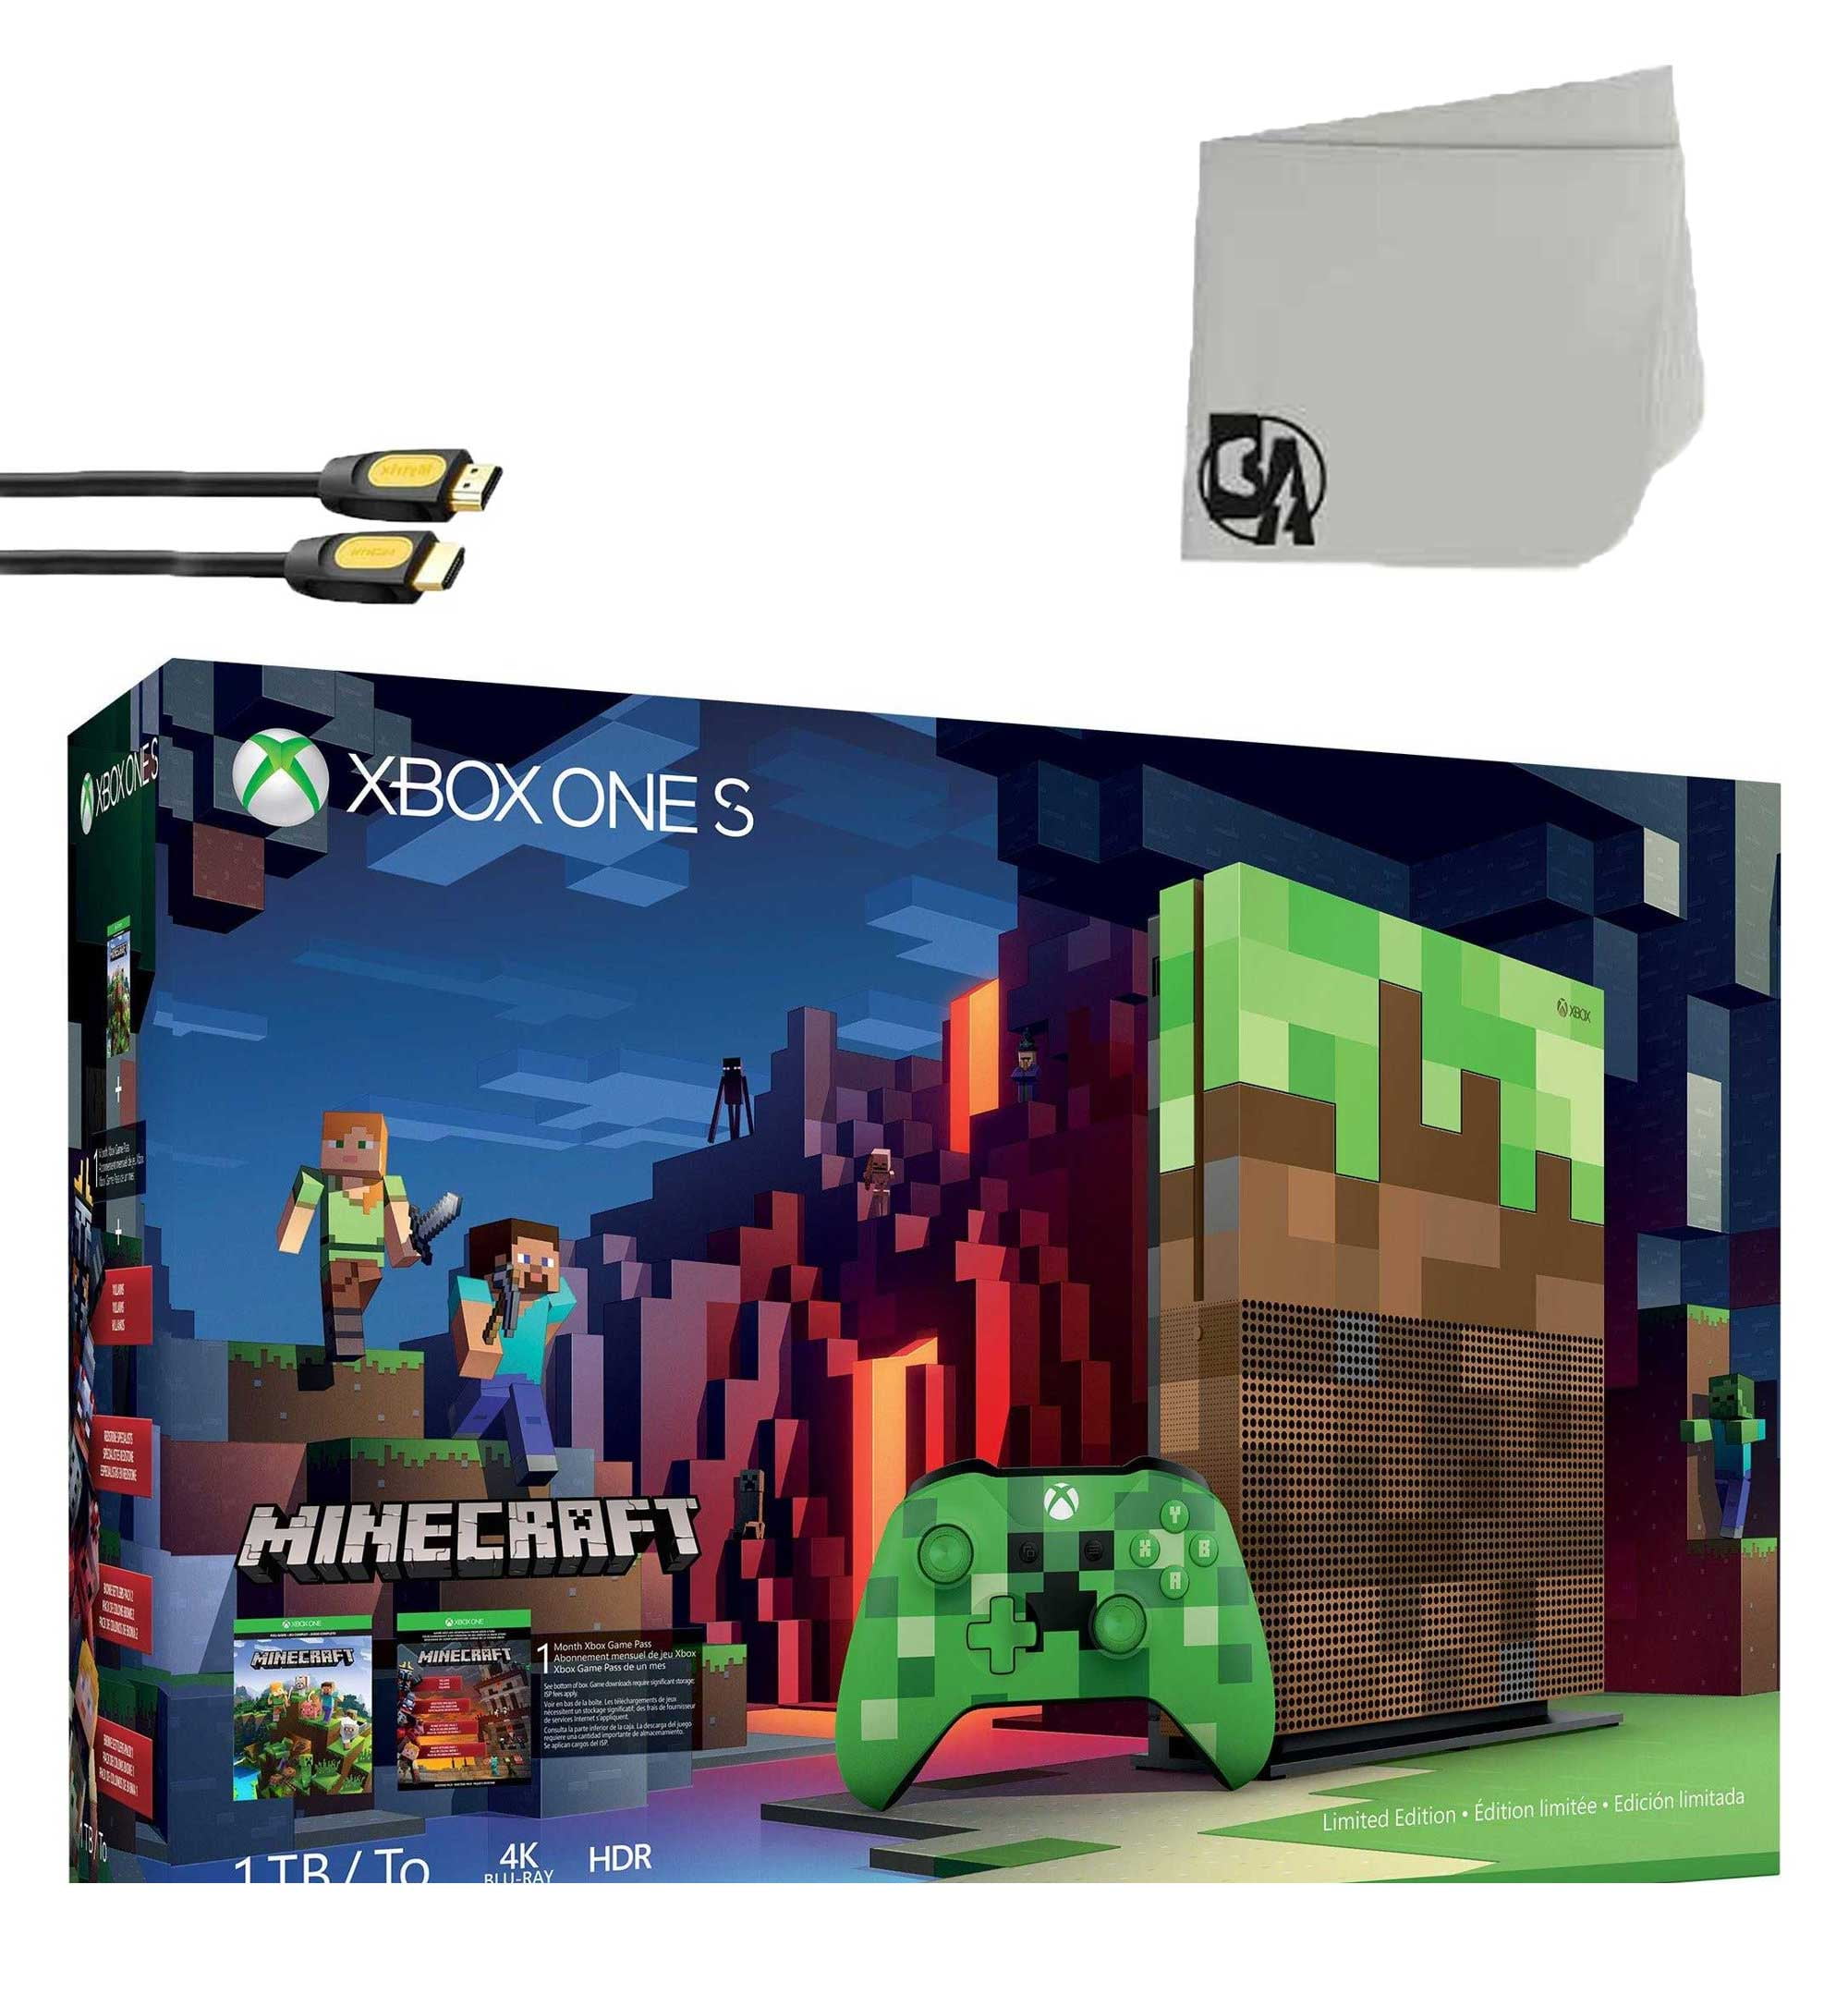 perecer exposición pausa Microsoft 23C-00001 Xbox One S Minecraft Limited Edition 1TB Gaming Console  with BOLT AXTION Bundle Used - Walmart.com